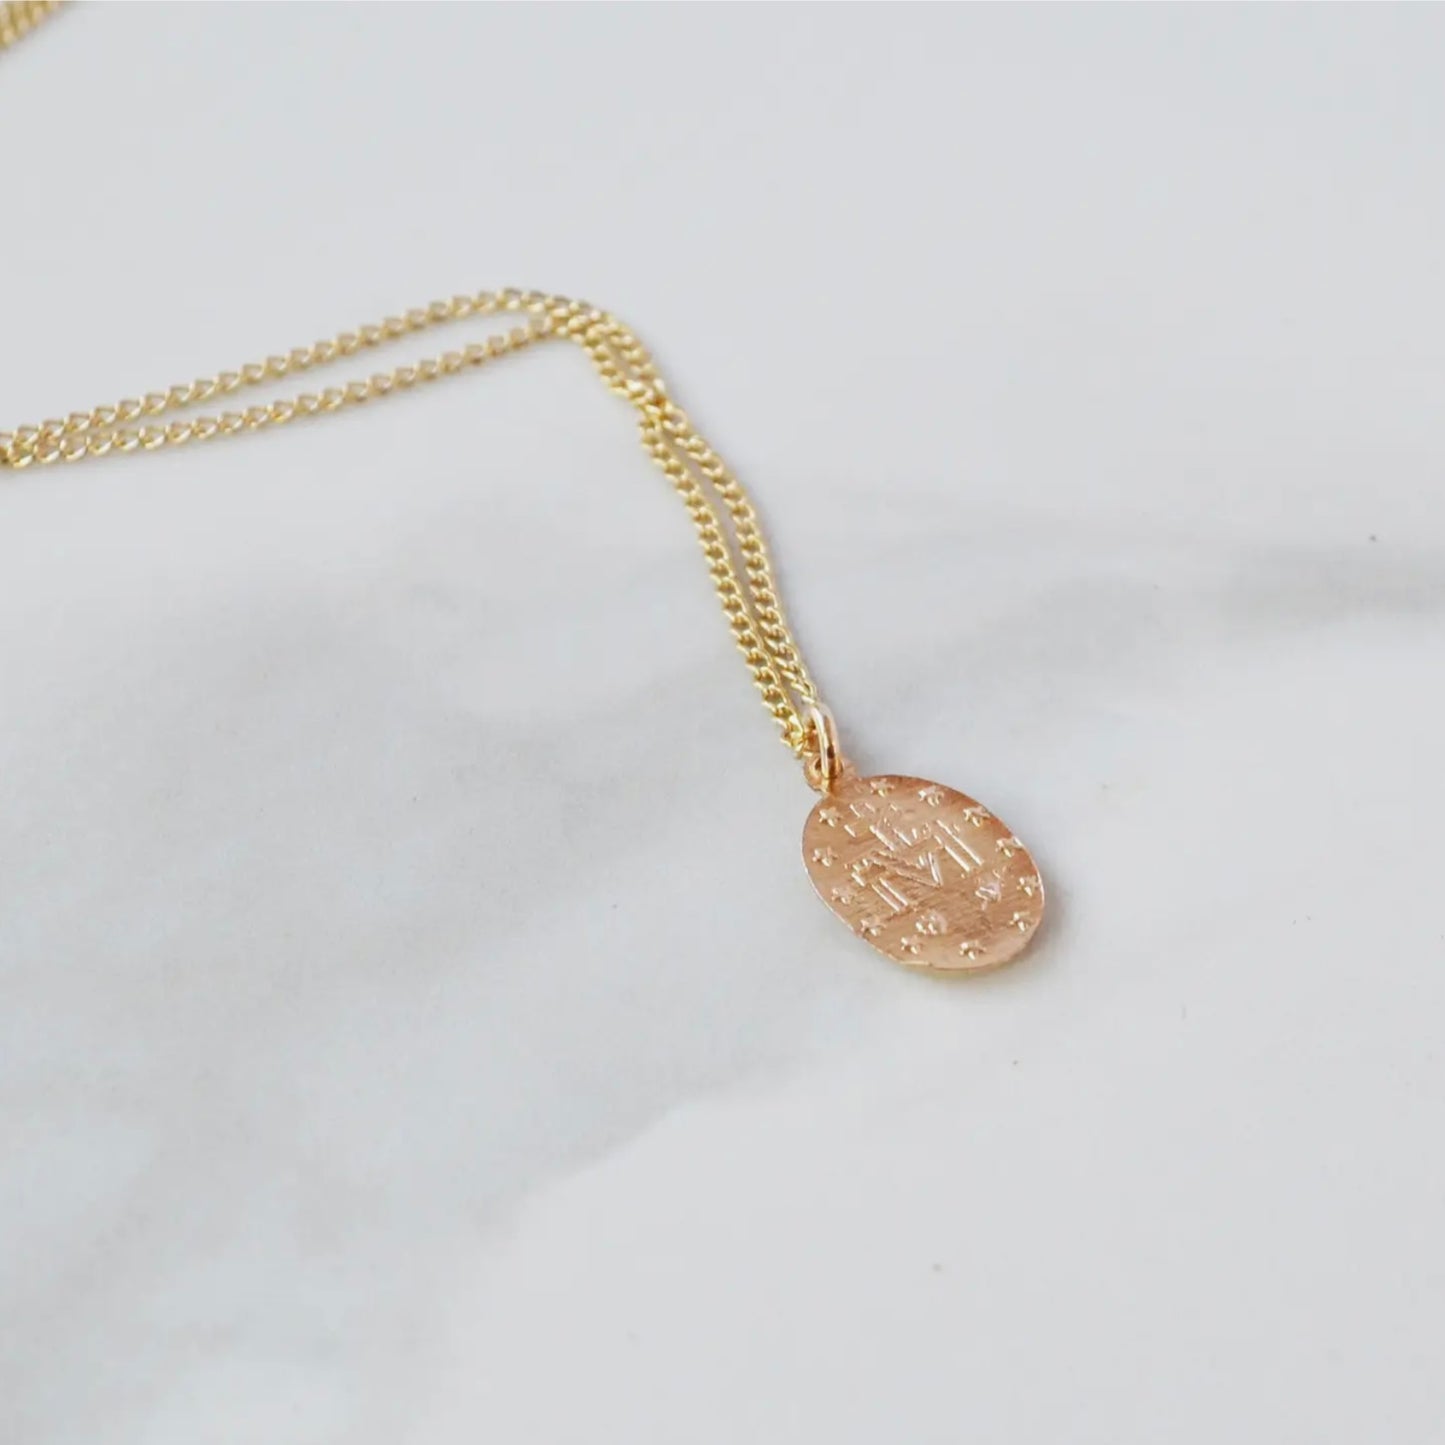 tiny-14k-gold-filled-miraculous-medal-necklace